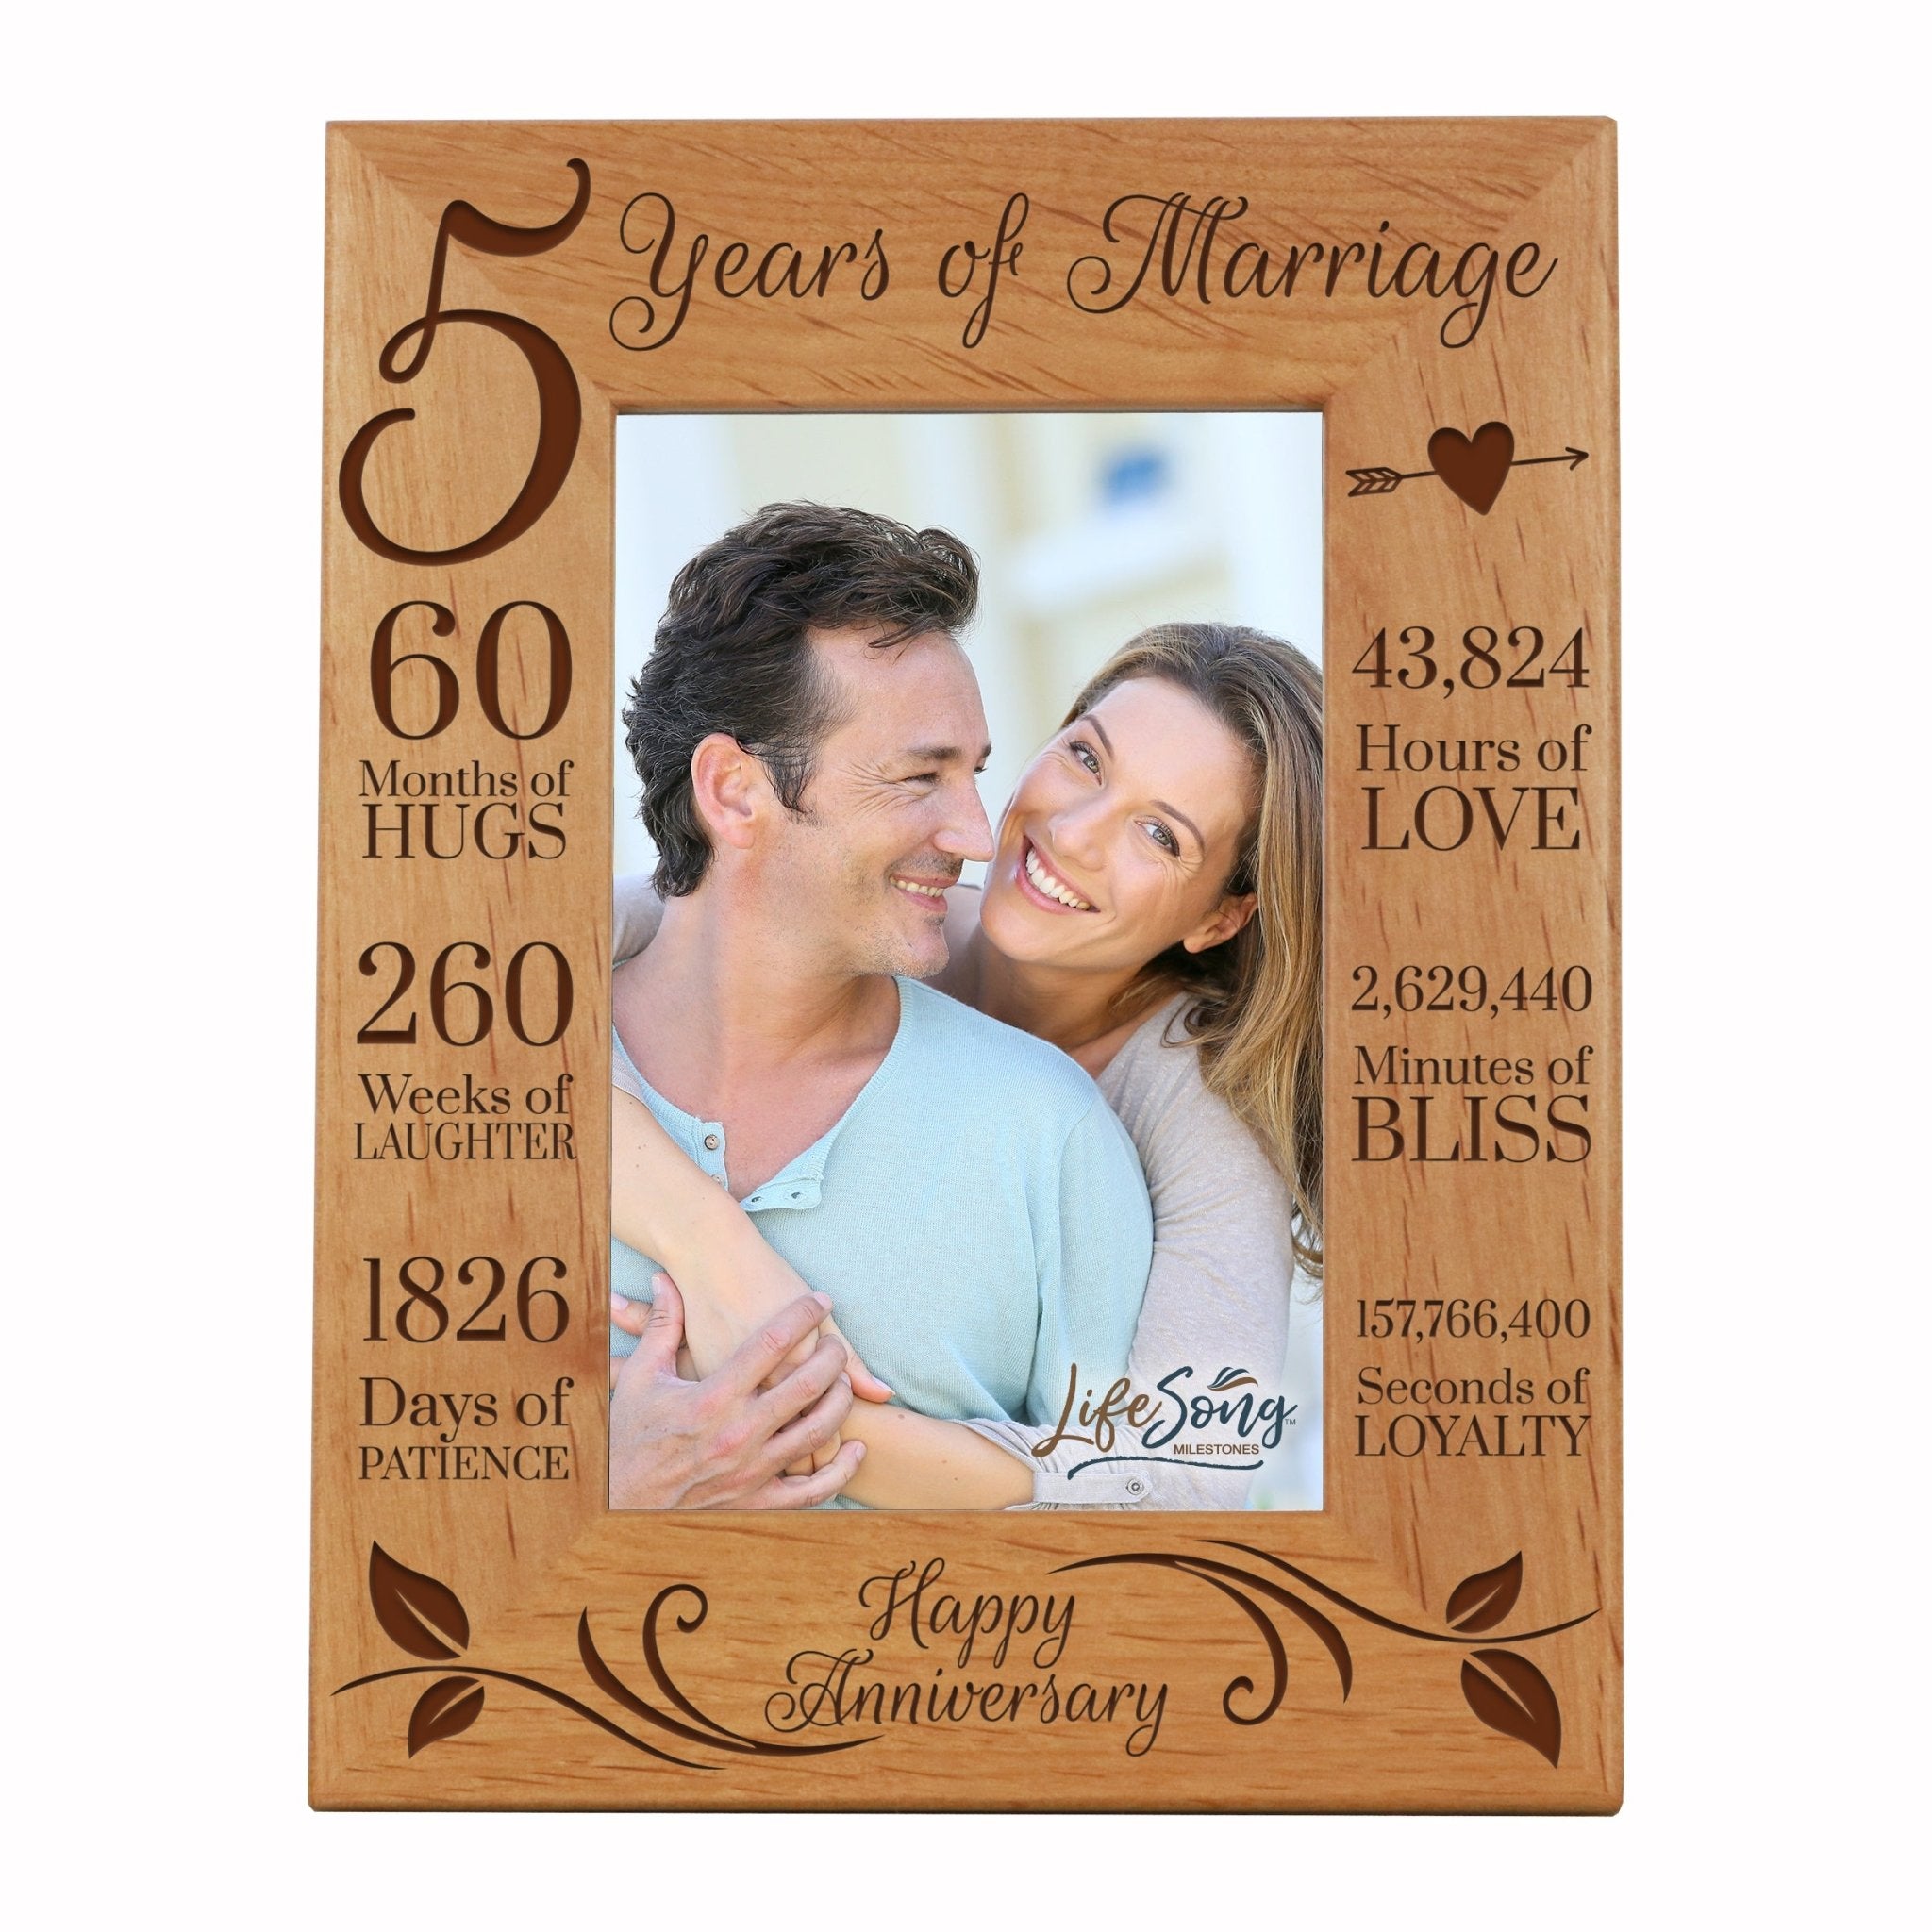 5 Years Anniversary Wind Chime, Happy 5th Anniversary Gift, 5 Years of  Marriage, Wood Wedding Anniversary Keepsake for Couples Husband Wife